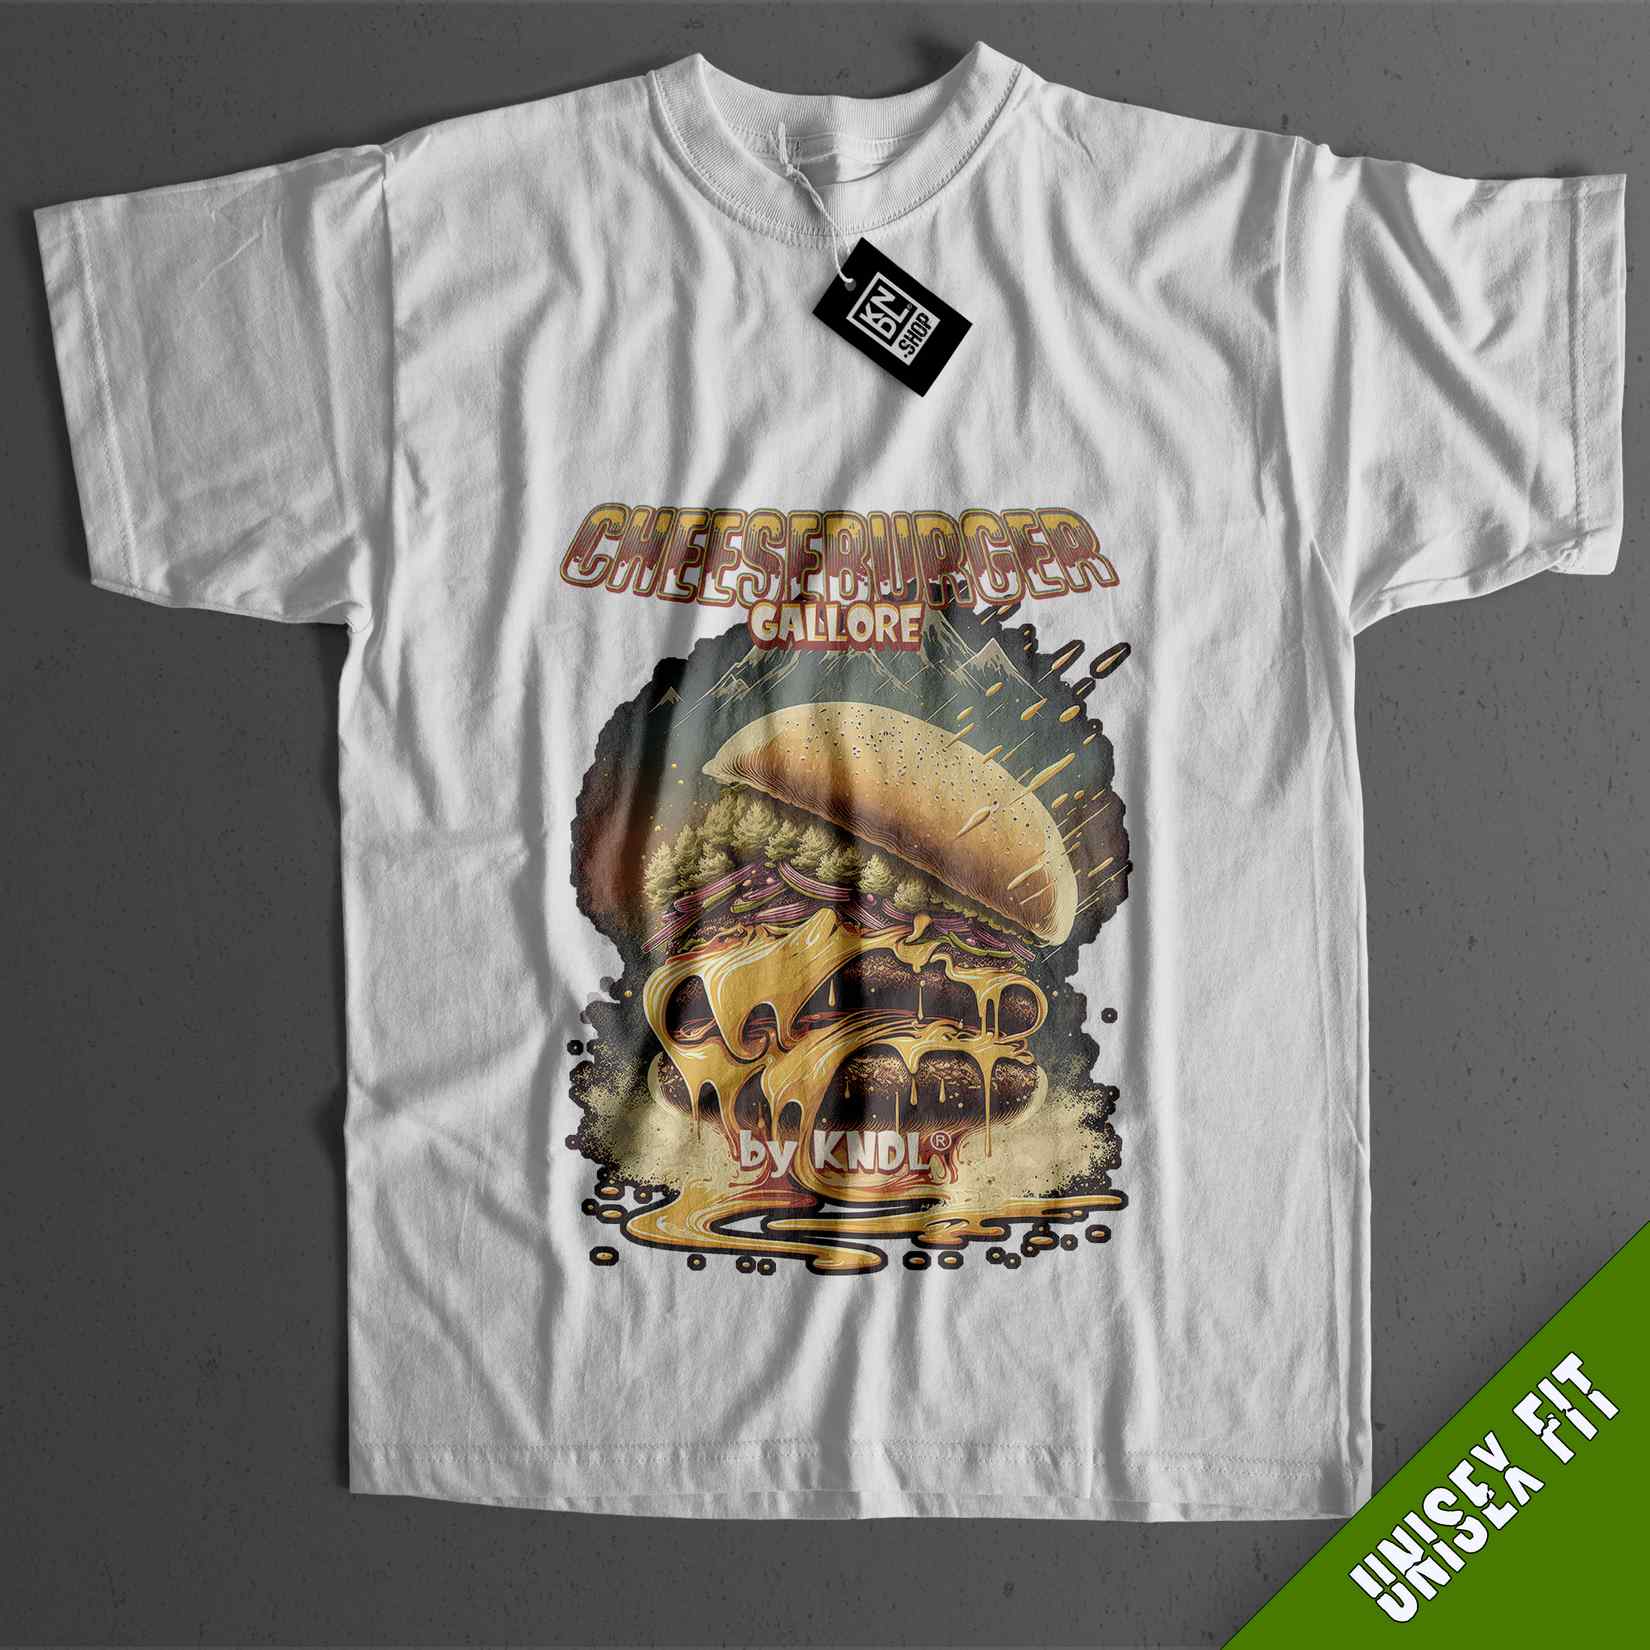 a white t - shirt with a picture of a sandwich on it